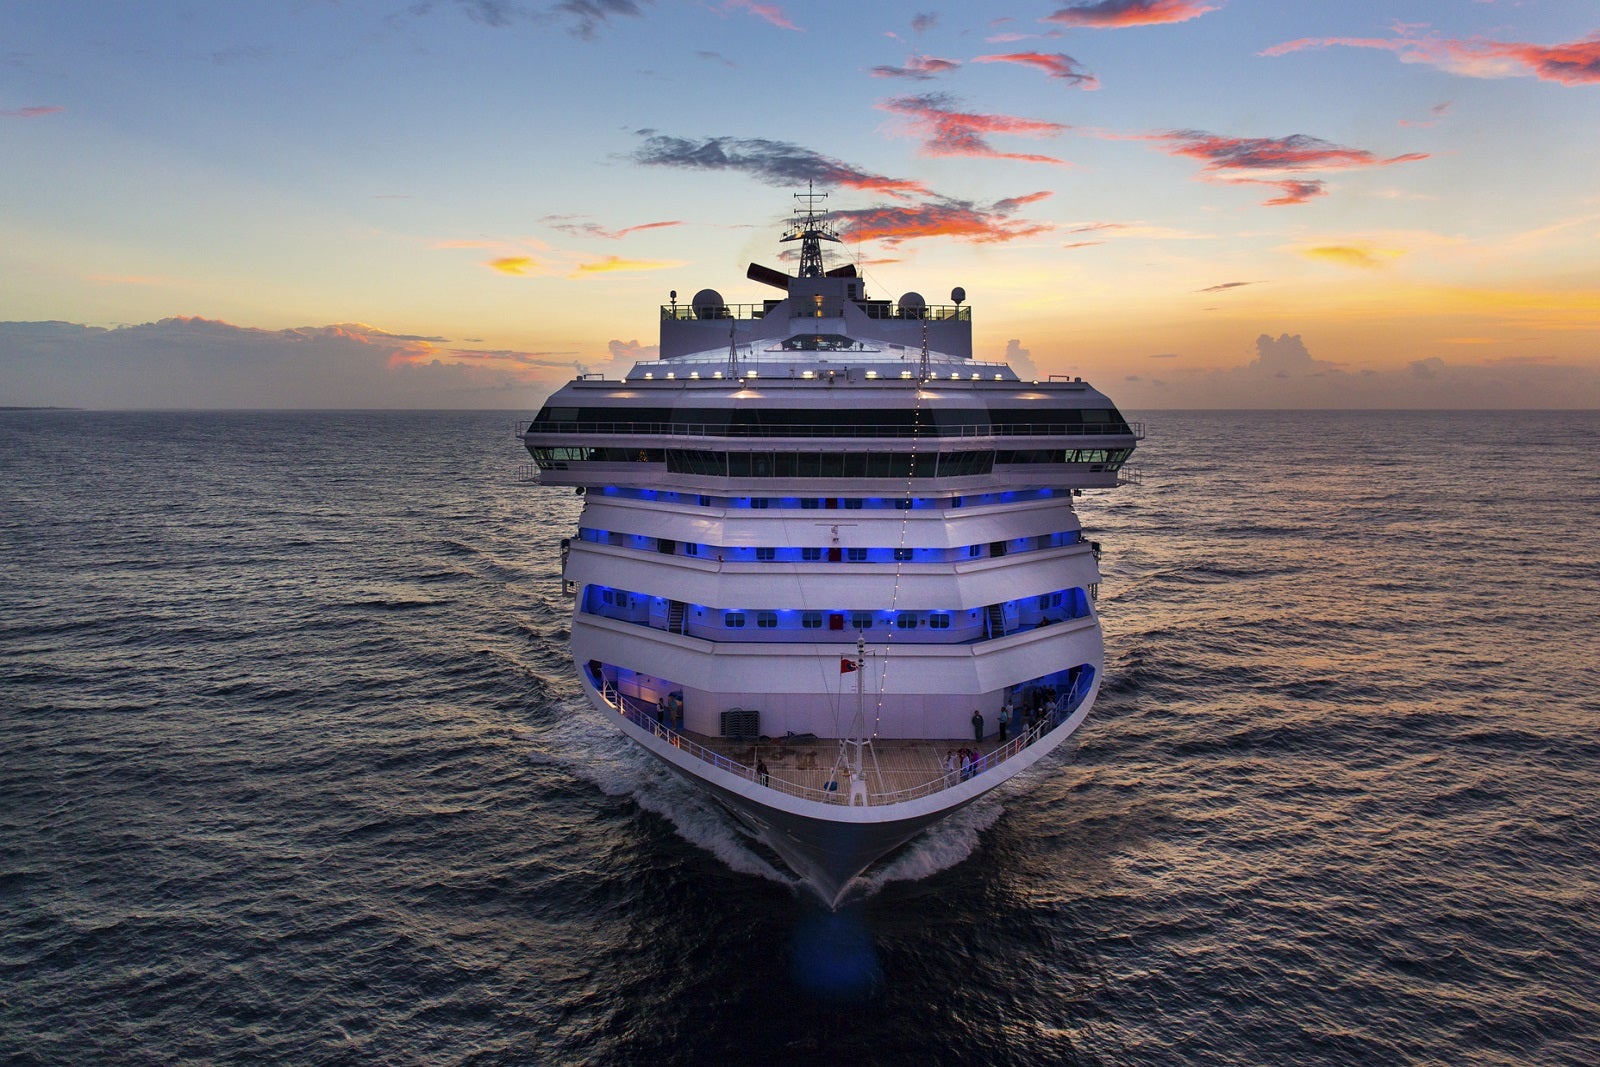 New Zones Revealed for Upcoming Carnival Jubilee Cruise Ship